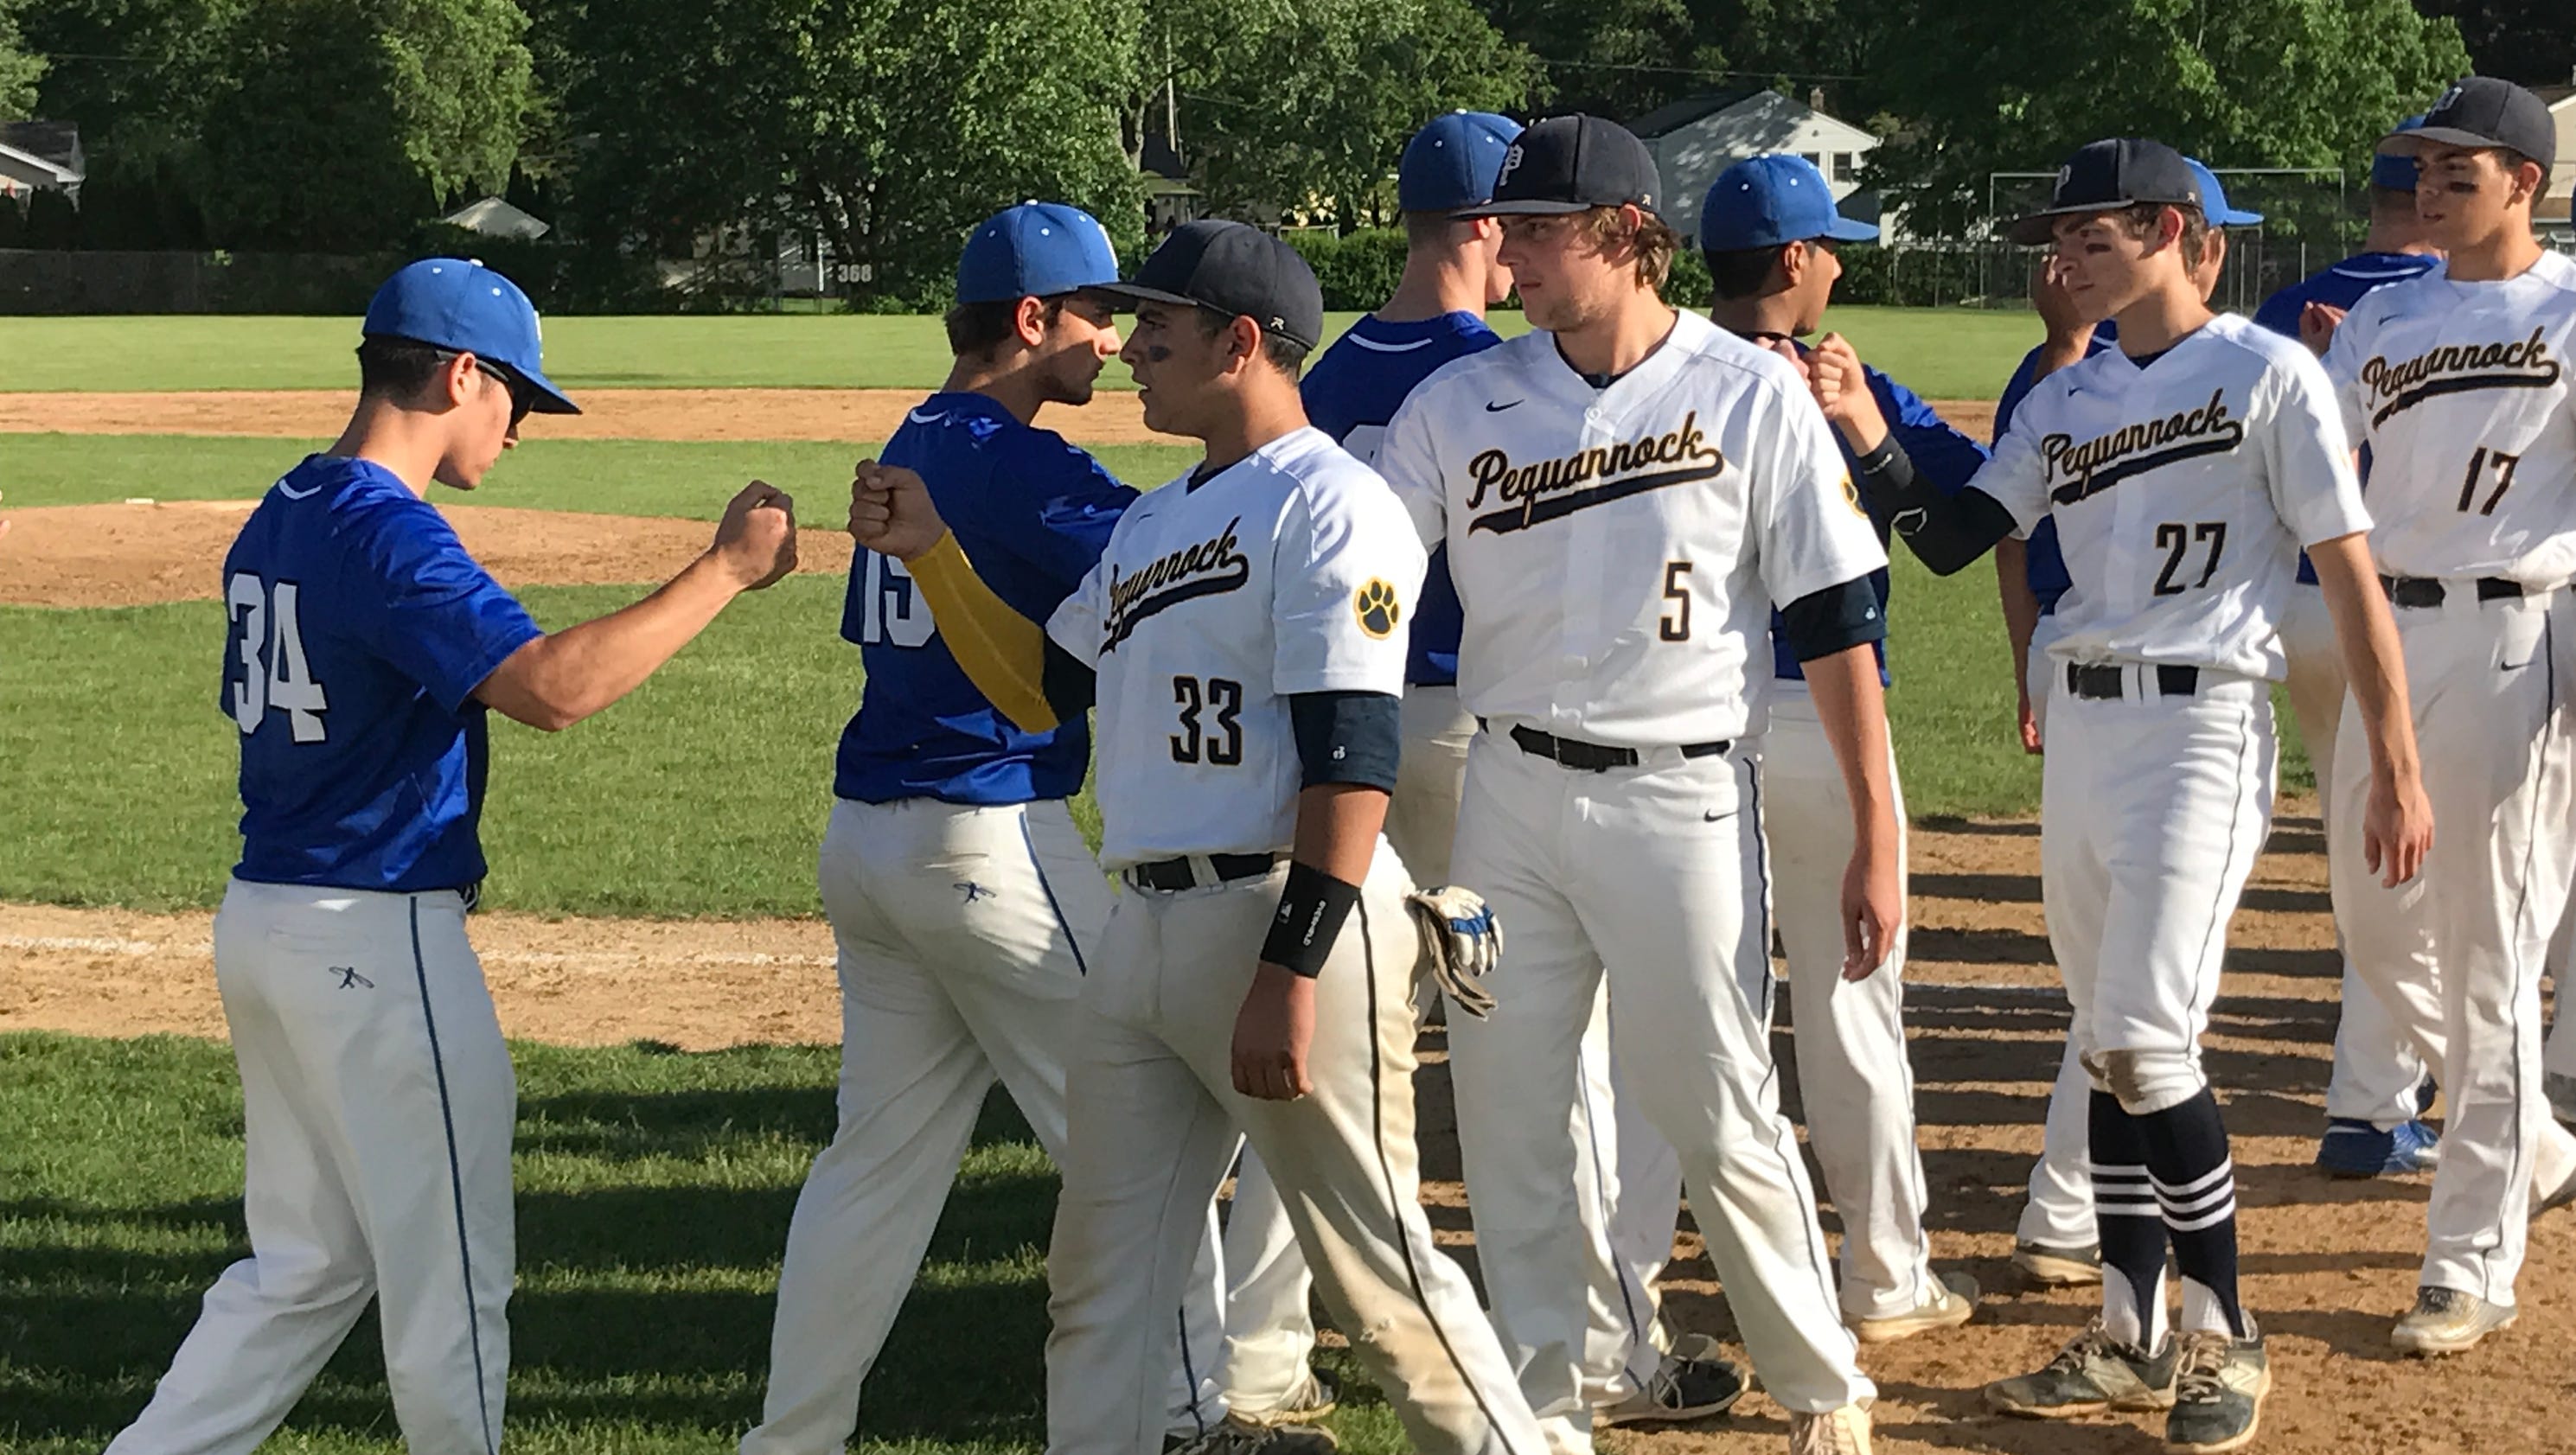 Baseball Pequannock winning with slow, steady approach